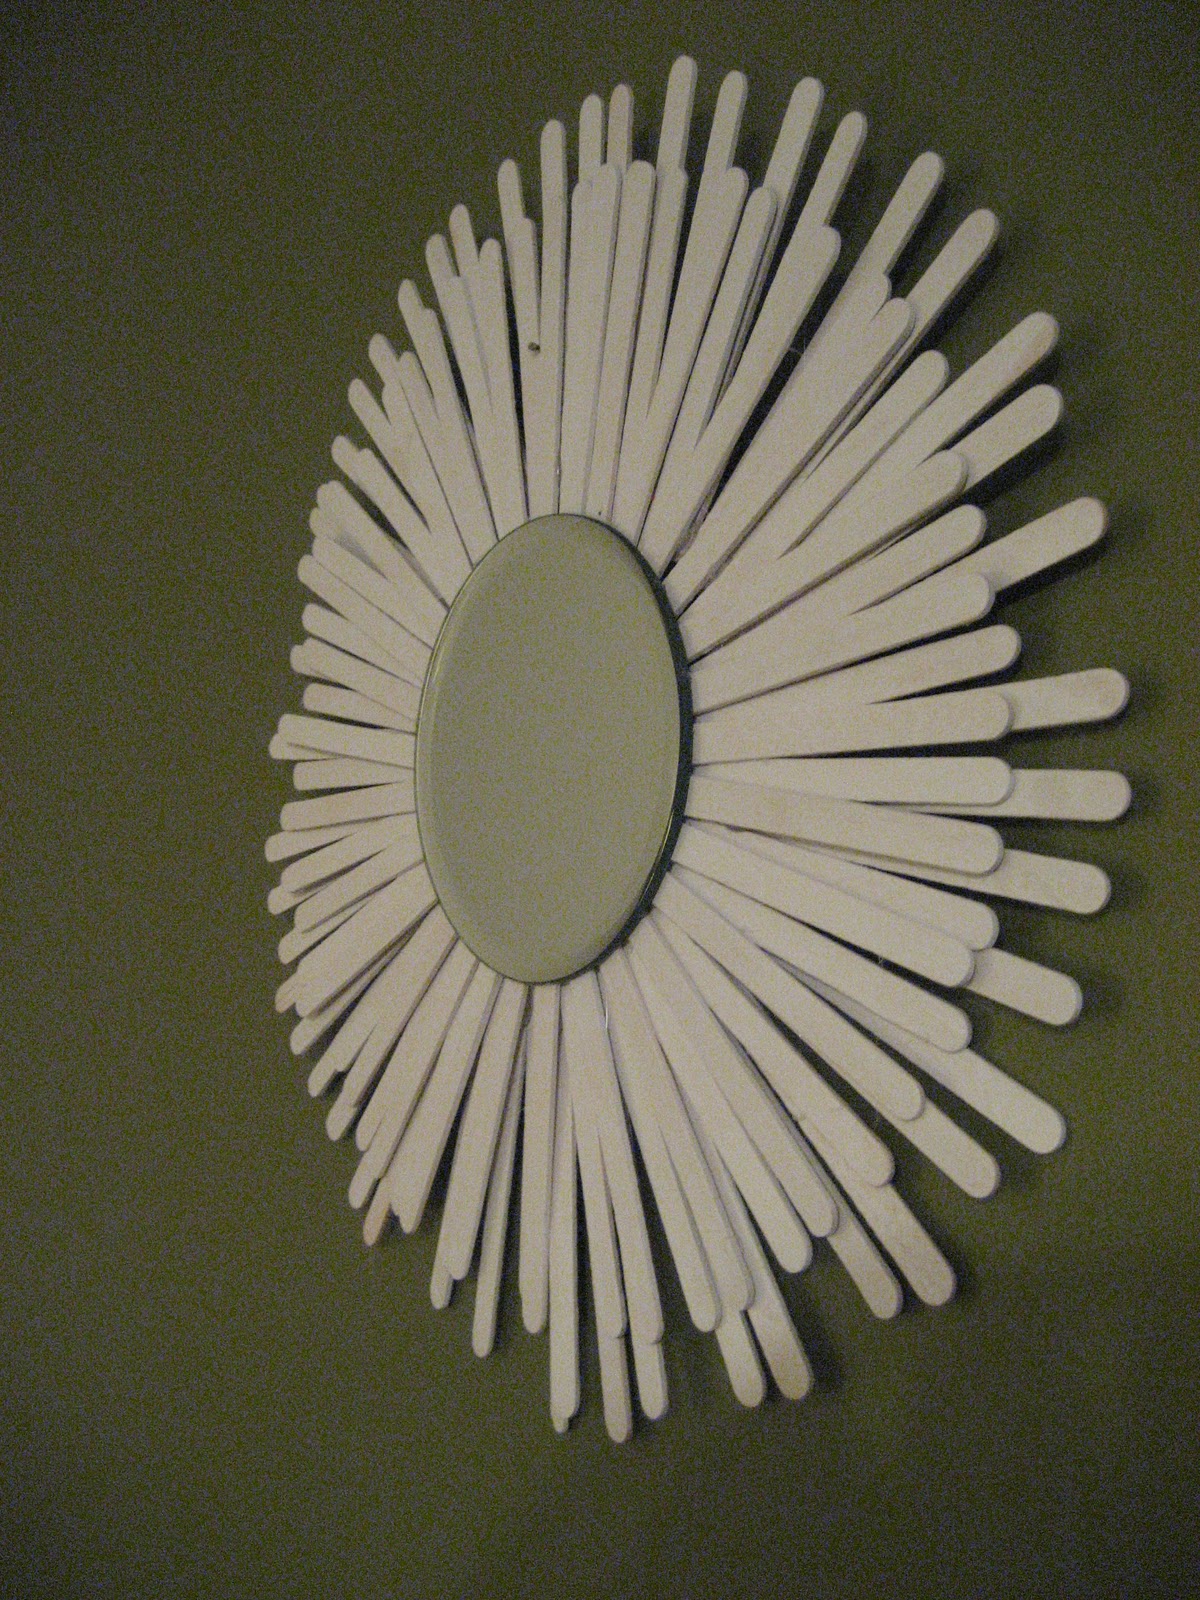 Make this super stylish starburst mirror that will dress up any room in your home